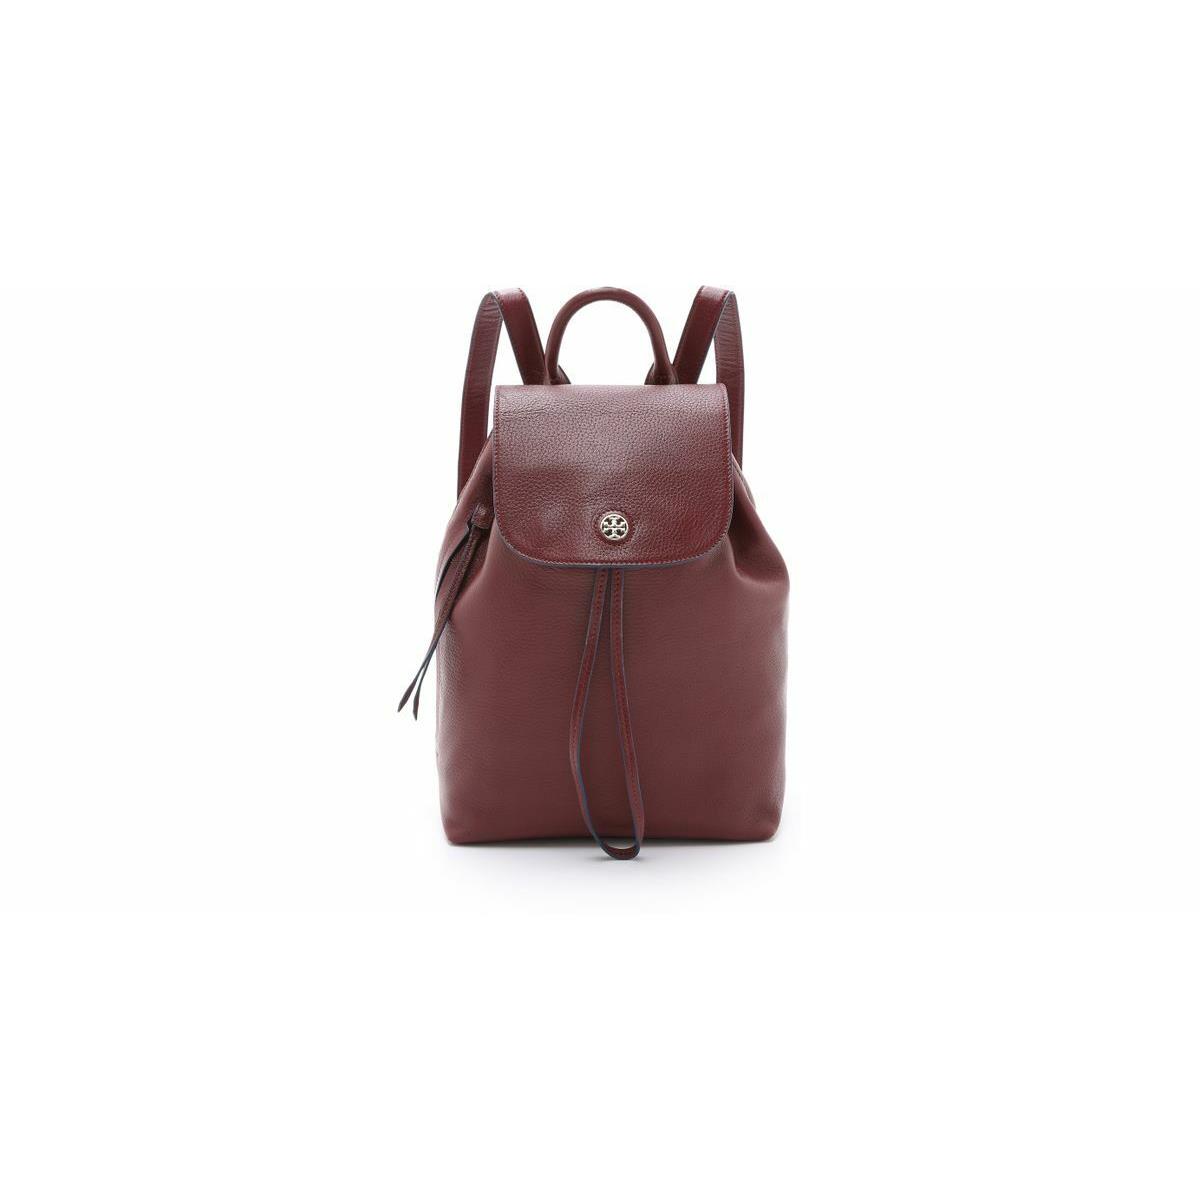 Tory Burch Brody Leather Backpack Deep Berry